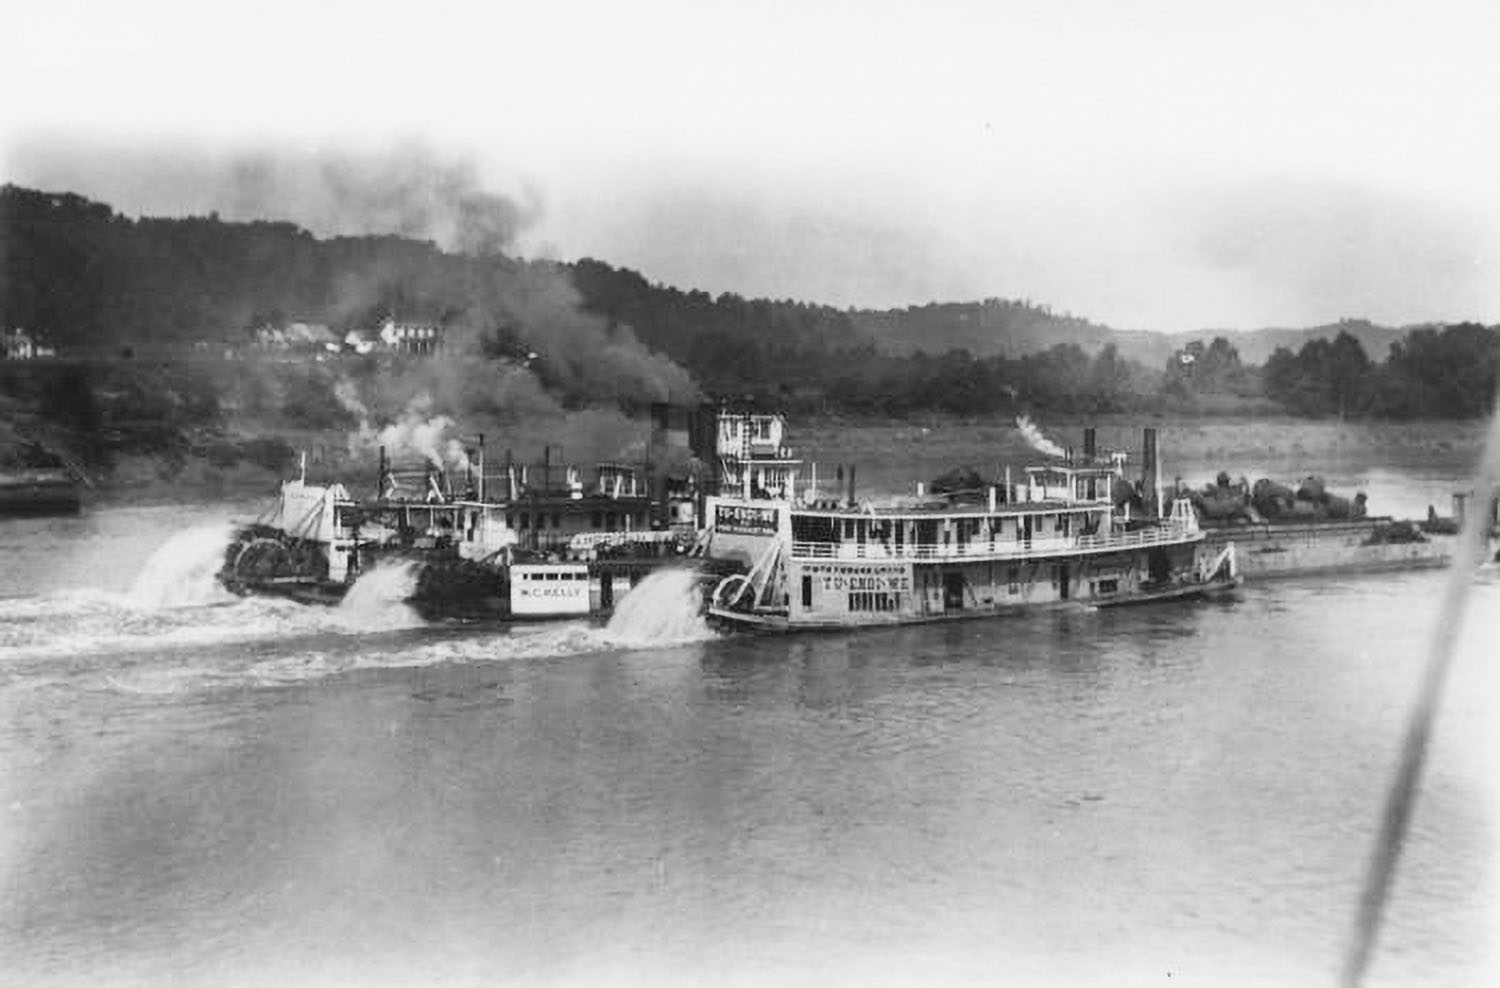 Shoving up over Lock 29 with three American Barge Line boats. (David Smith collection)